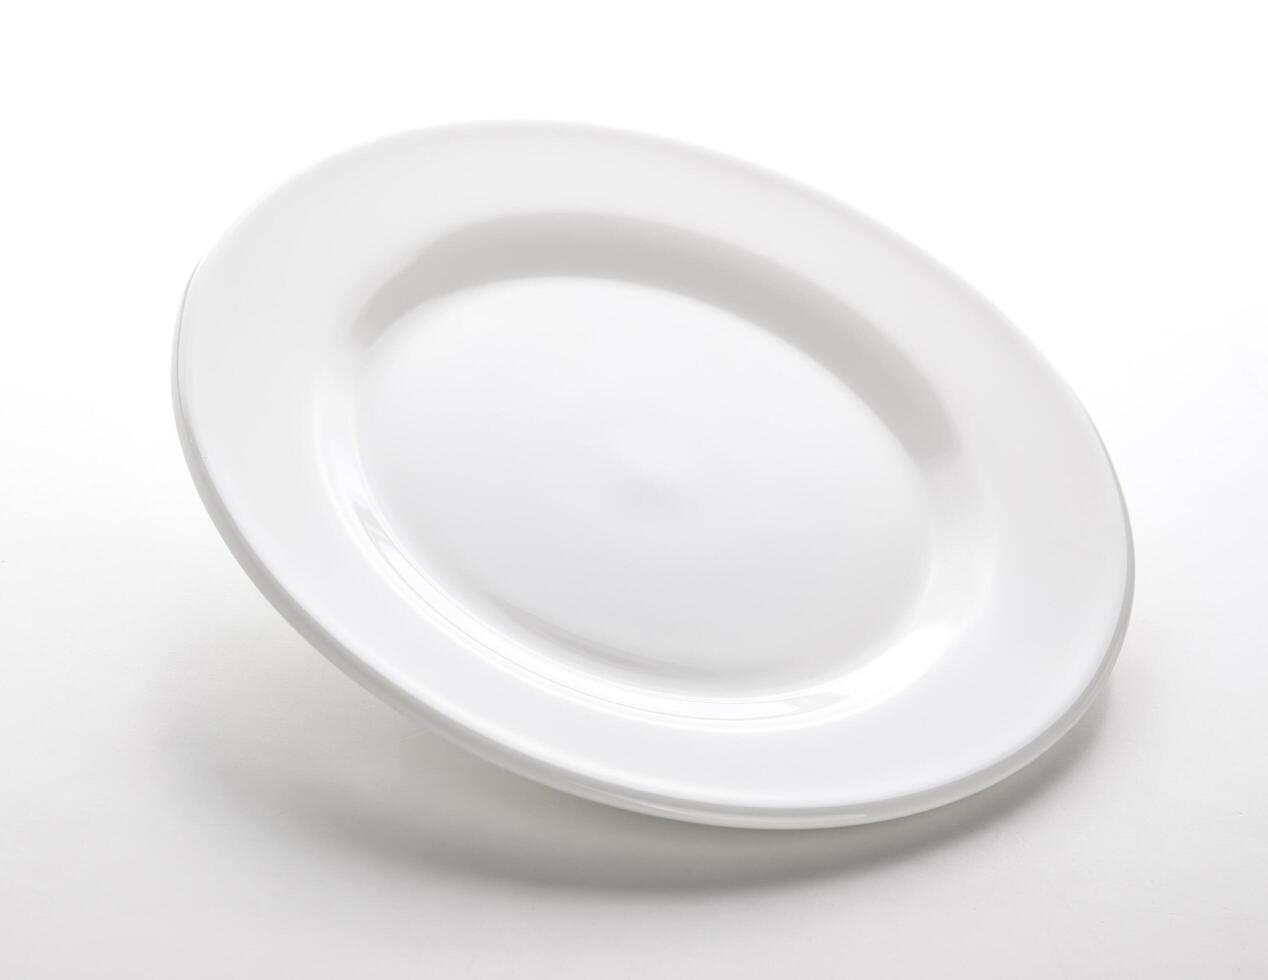 White plate isolated on white table, empty dish template photo